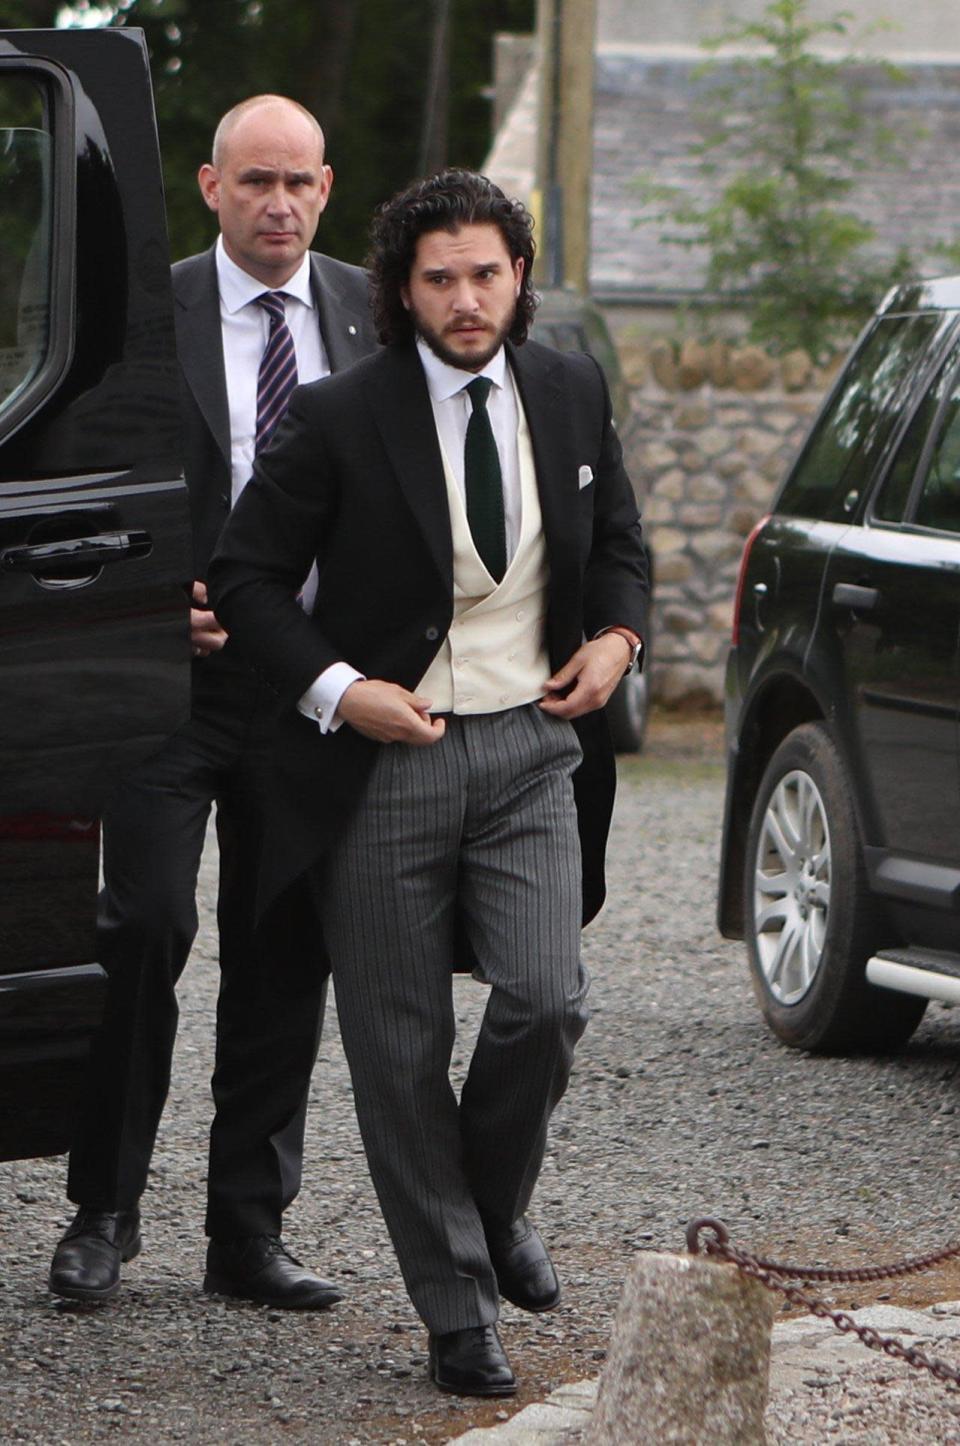 Groom Kit Harrison looks nervous as he arrives at the church (PA)